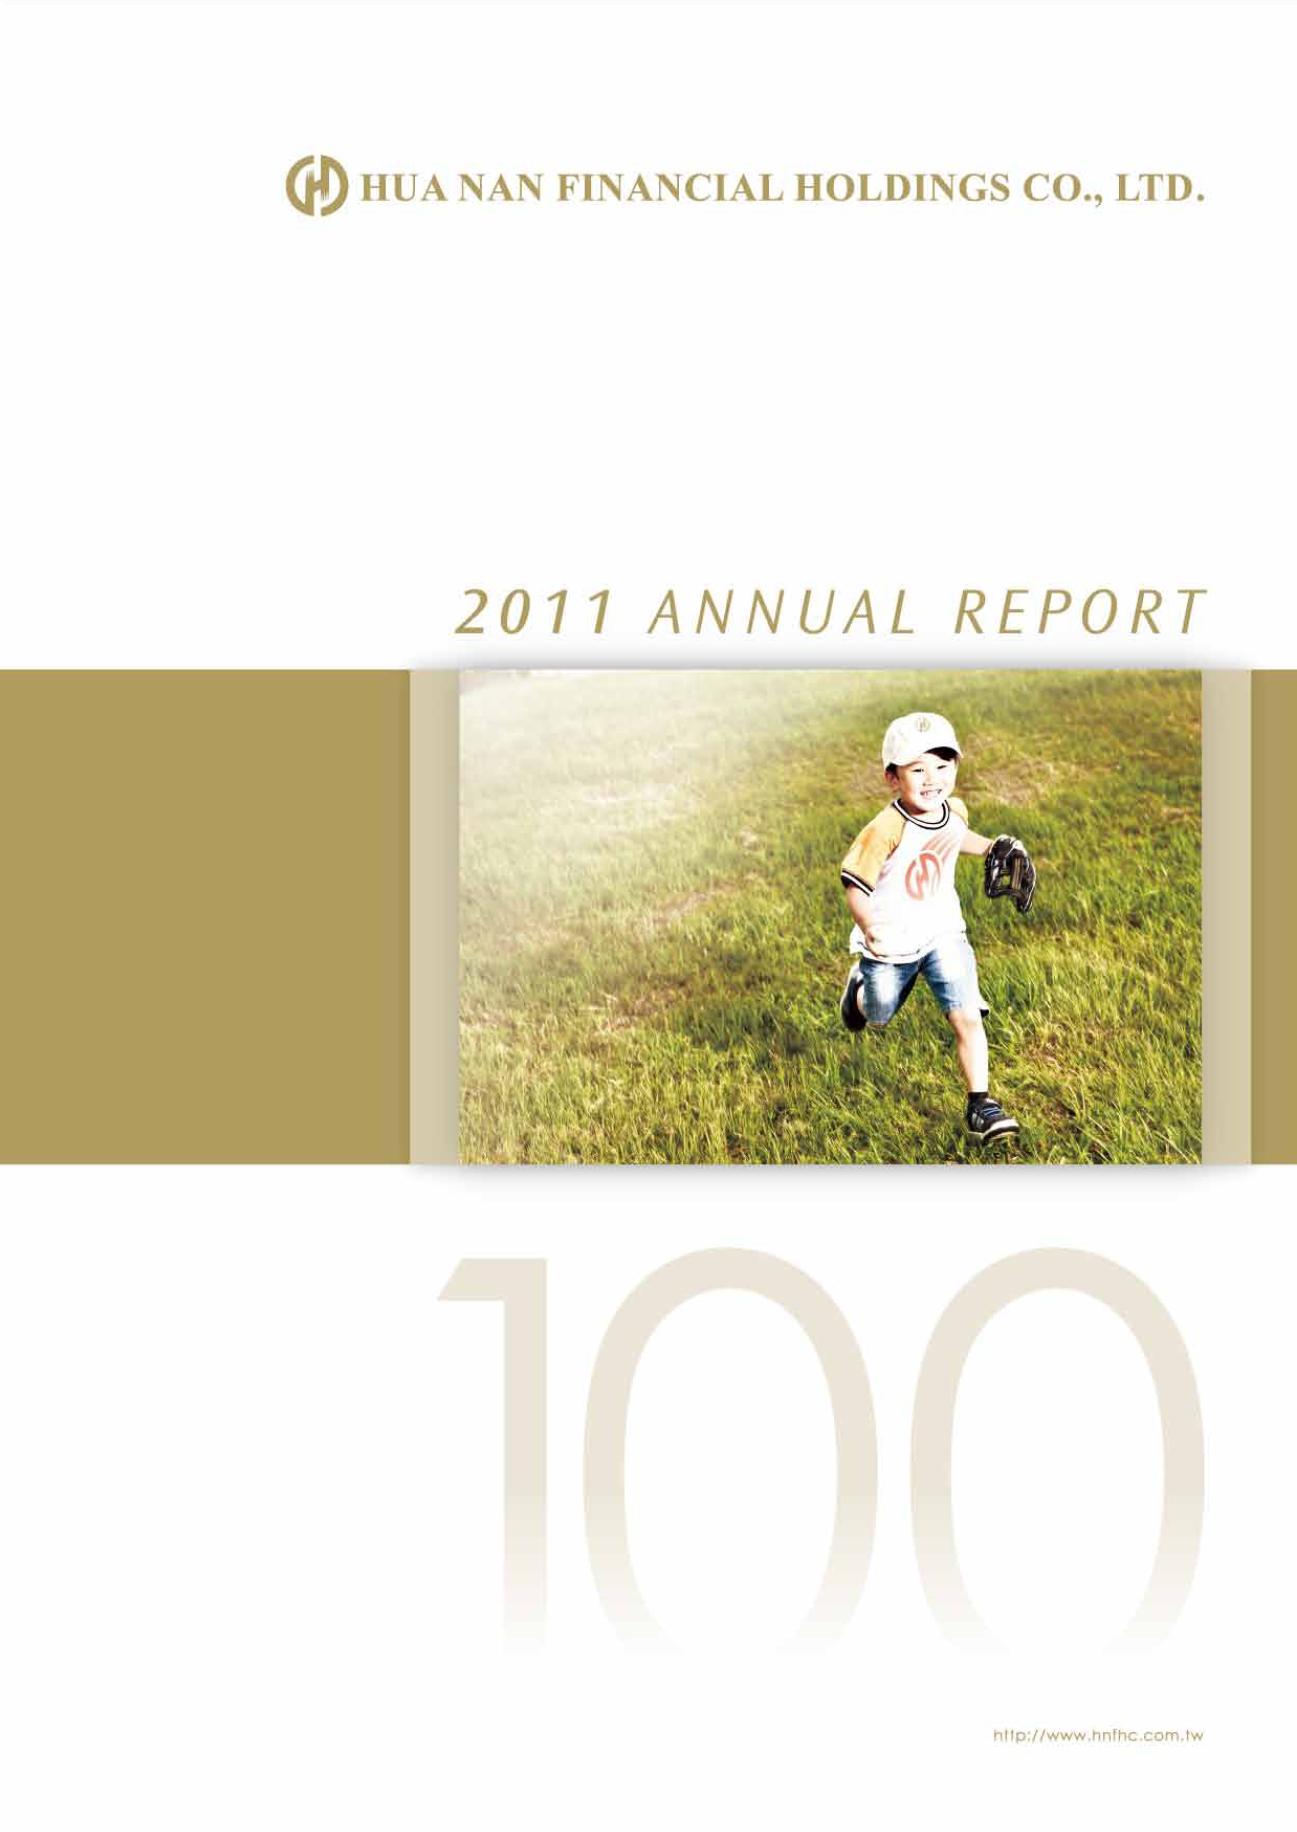 The cover of 2011 Annual Reports